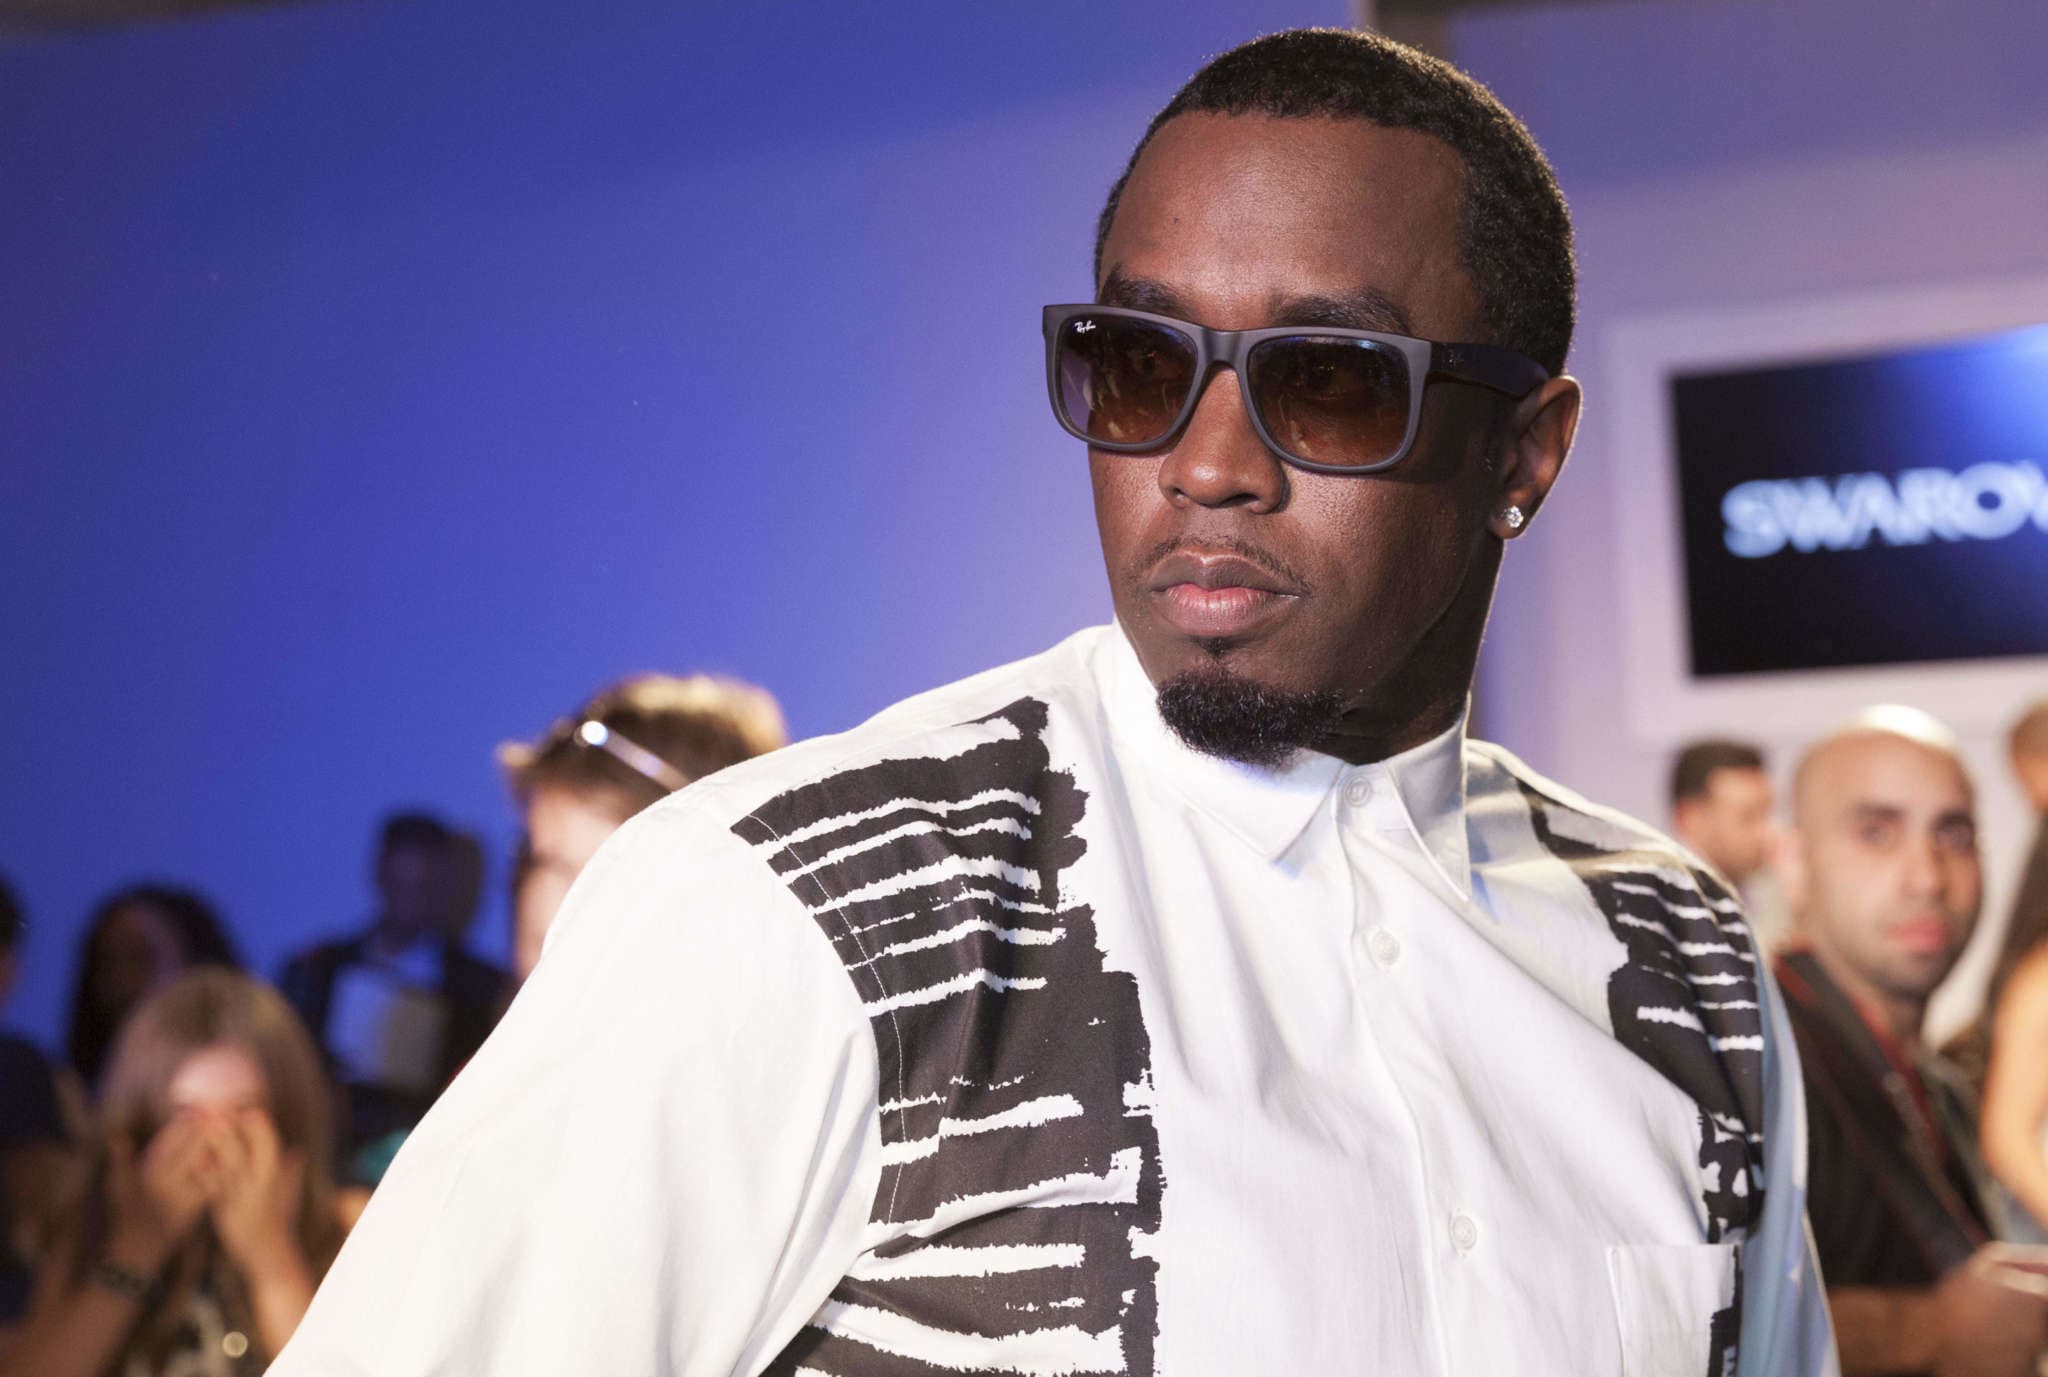 Diddy Supports The 'Free Tianna Coalition' - See His Fans' Reactions